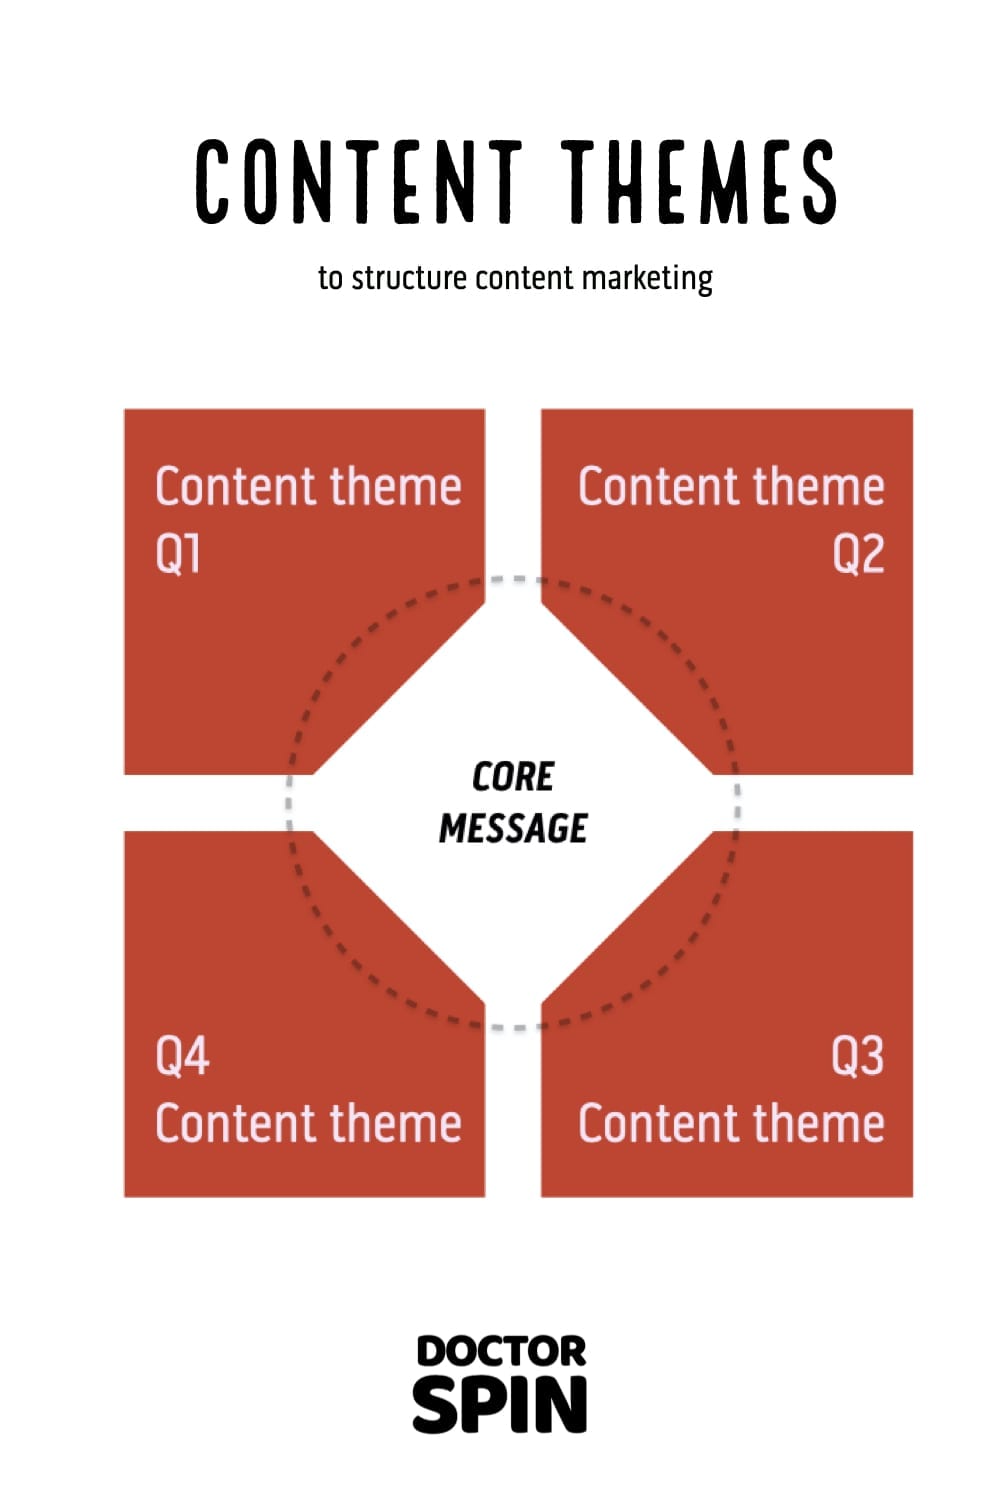 Content themes for content marketing